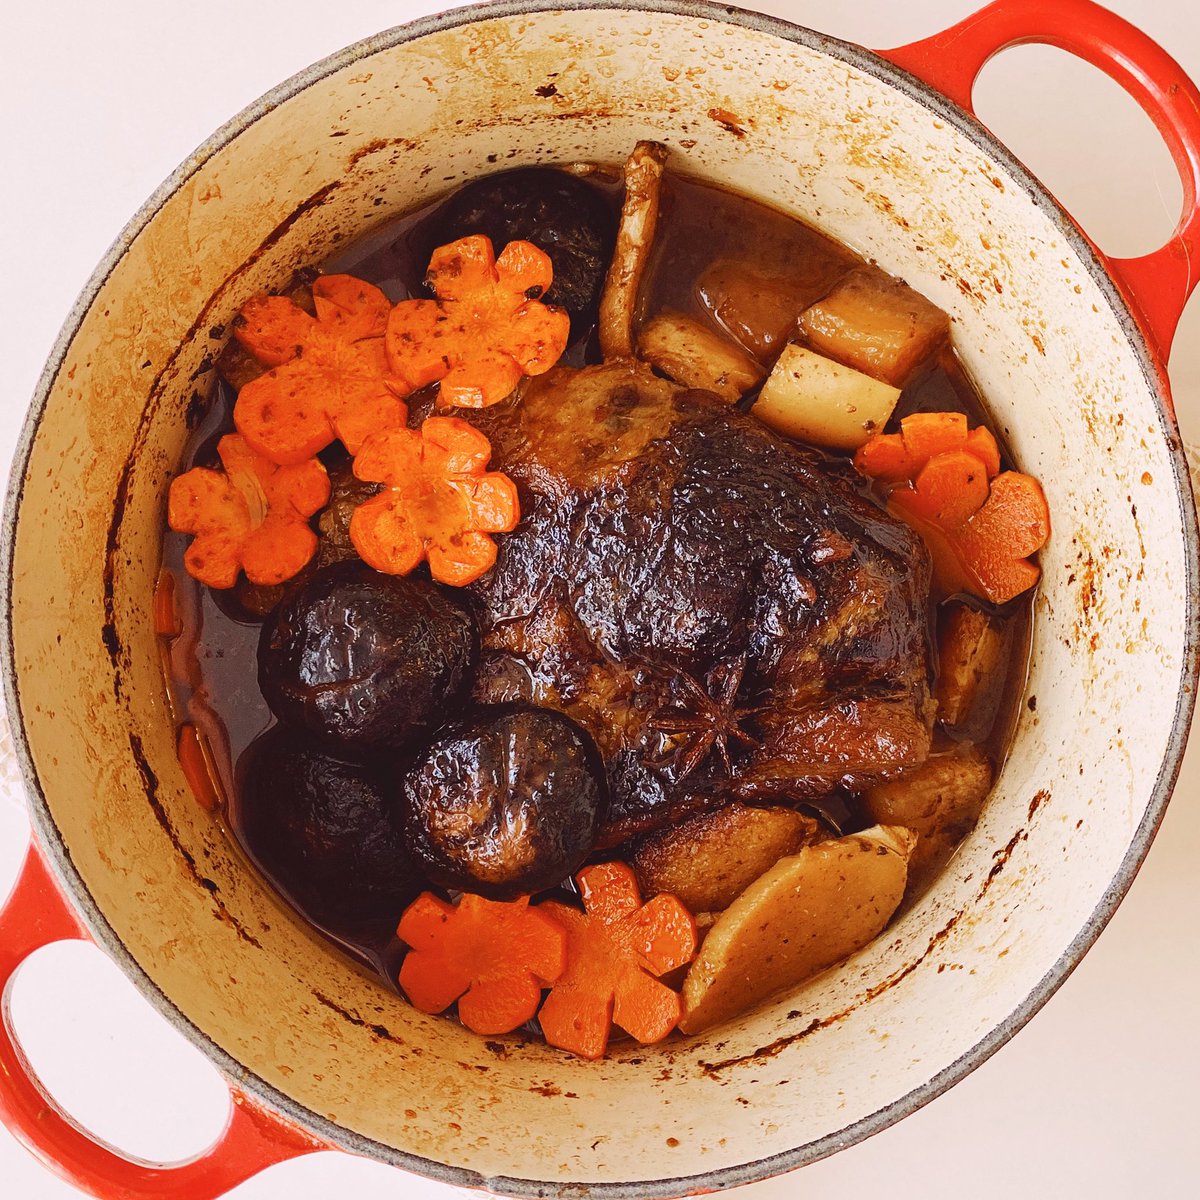 Particularly proud of this one: Braised brisket, Chinese-style. Ginger, star anise, daikon, shiitake, carrot, dark soy, Chinese brown sugar, stock, shaoxing. Slow cooked at 225F for many hours. It’s fucked up how well it turned out. I’m so proud of my brisket baby.